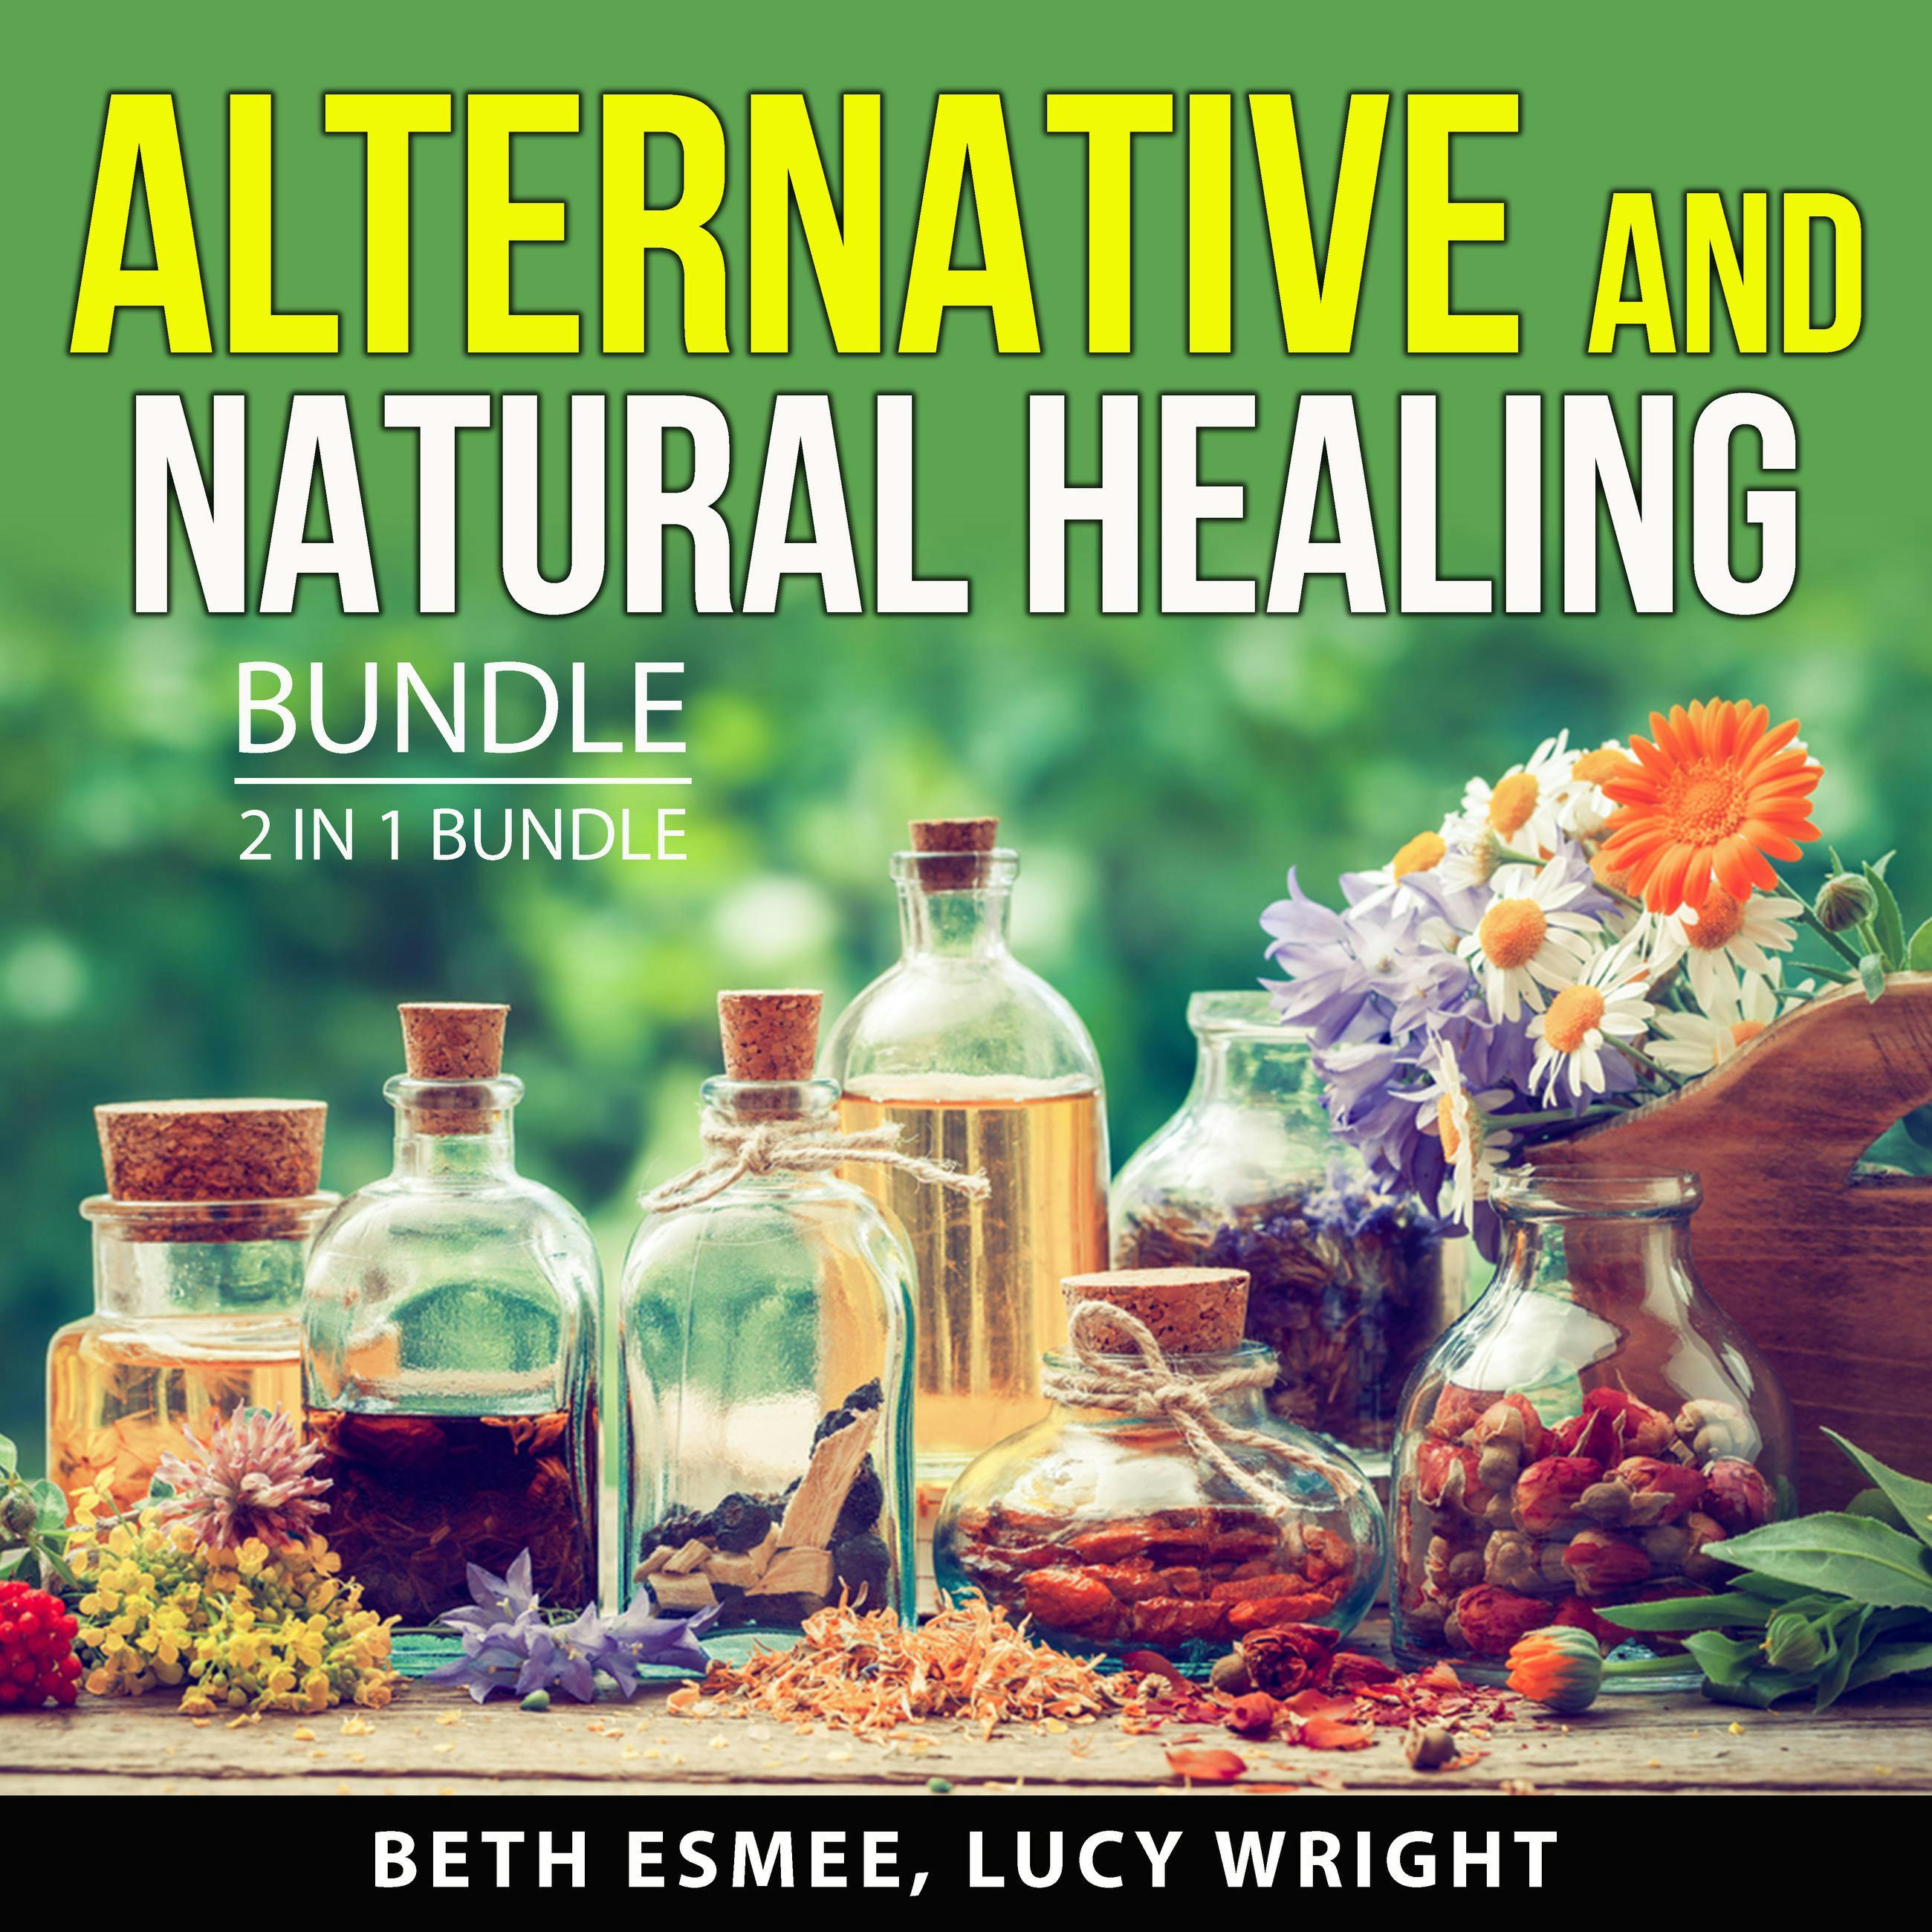 Alternative and Natural Healing Bundle, 2 in 1 Bundle: Healing Through Medicinal Herbs and Natural Cures and Remedies - Lucy Wright, Beth Esmee